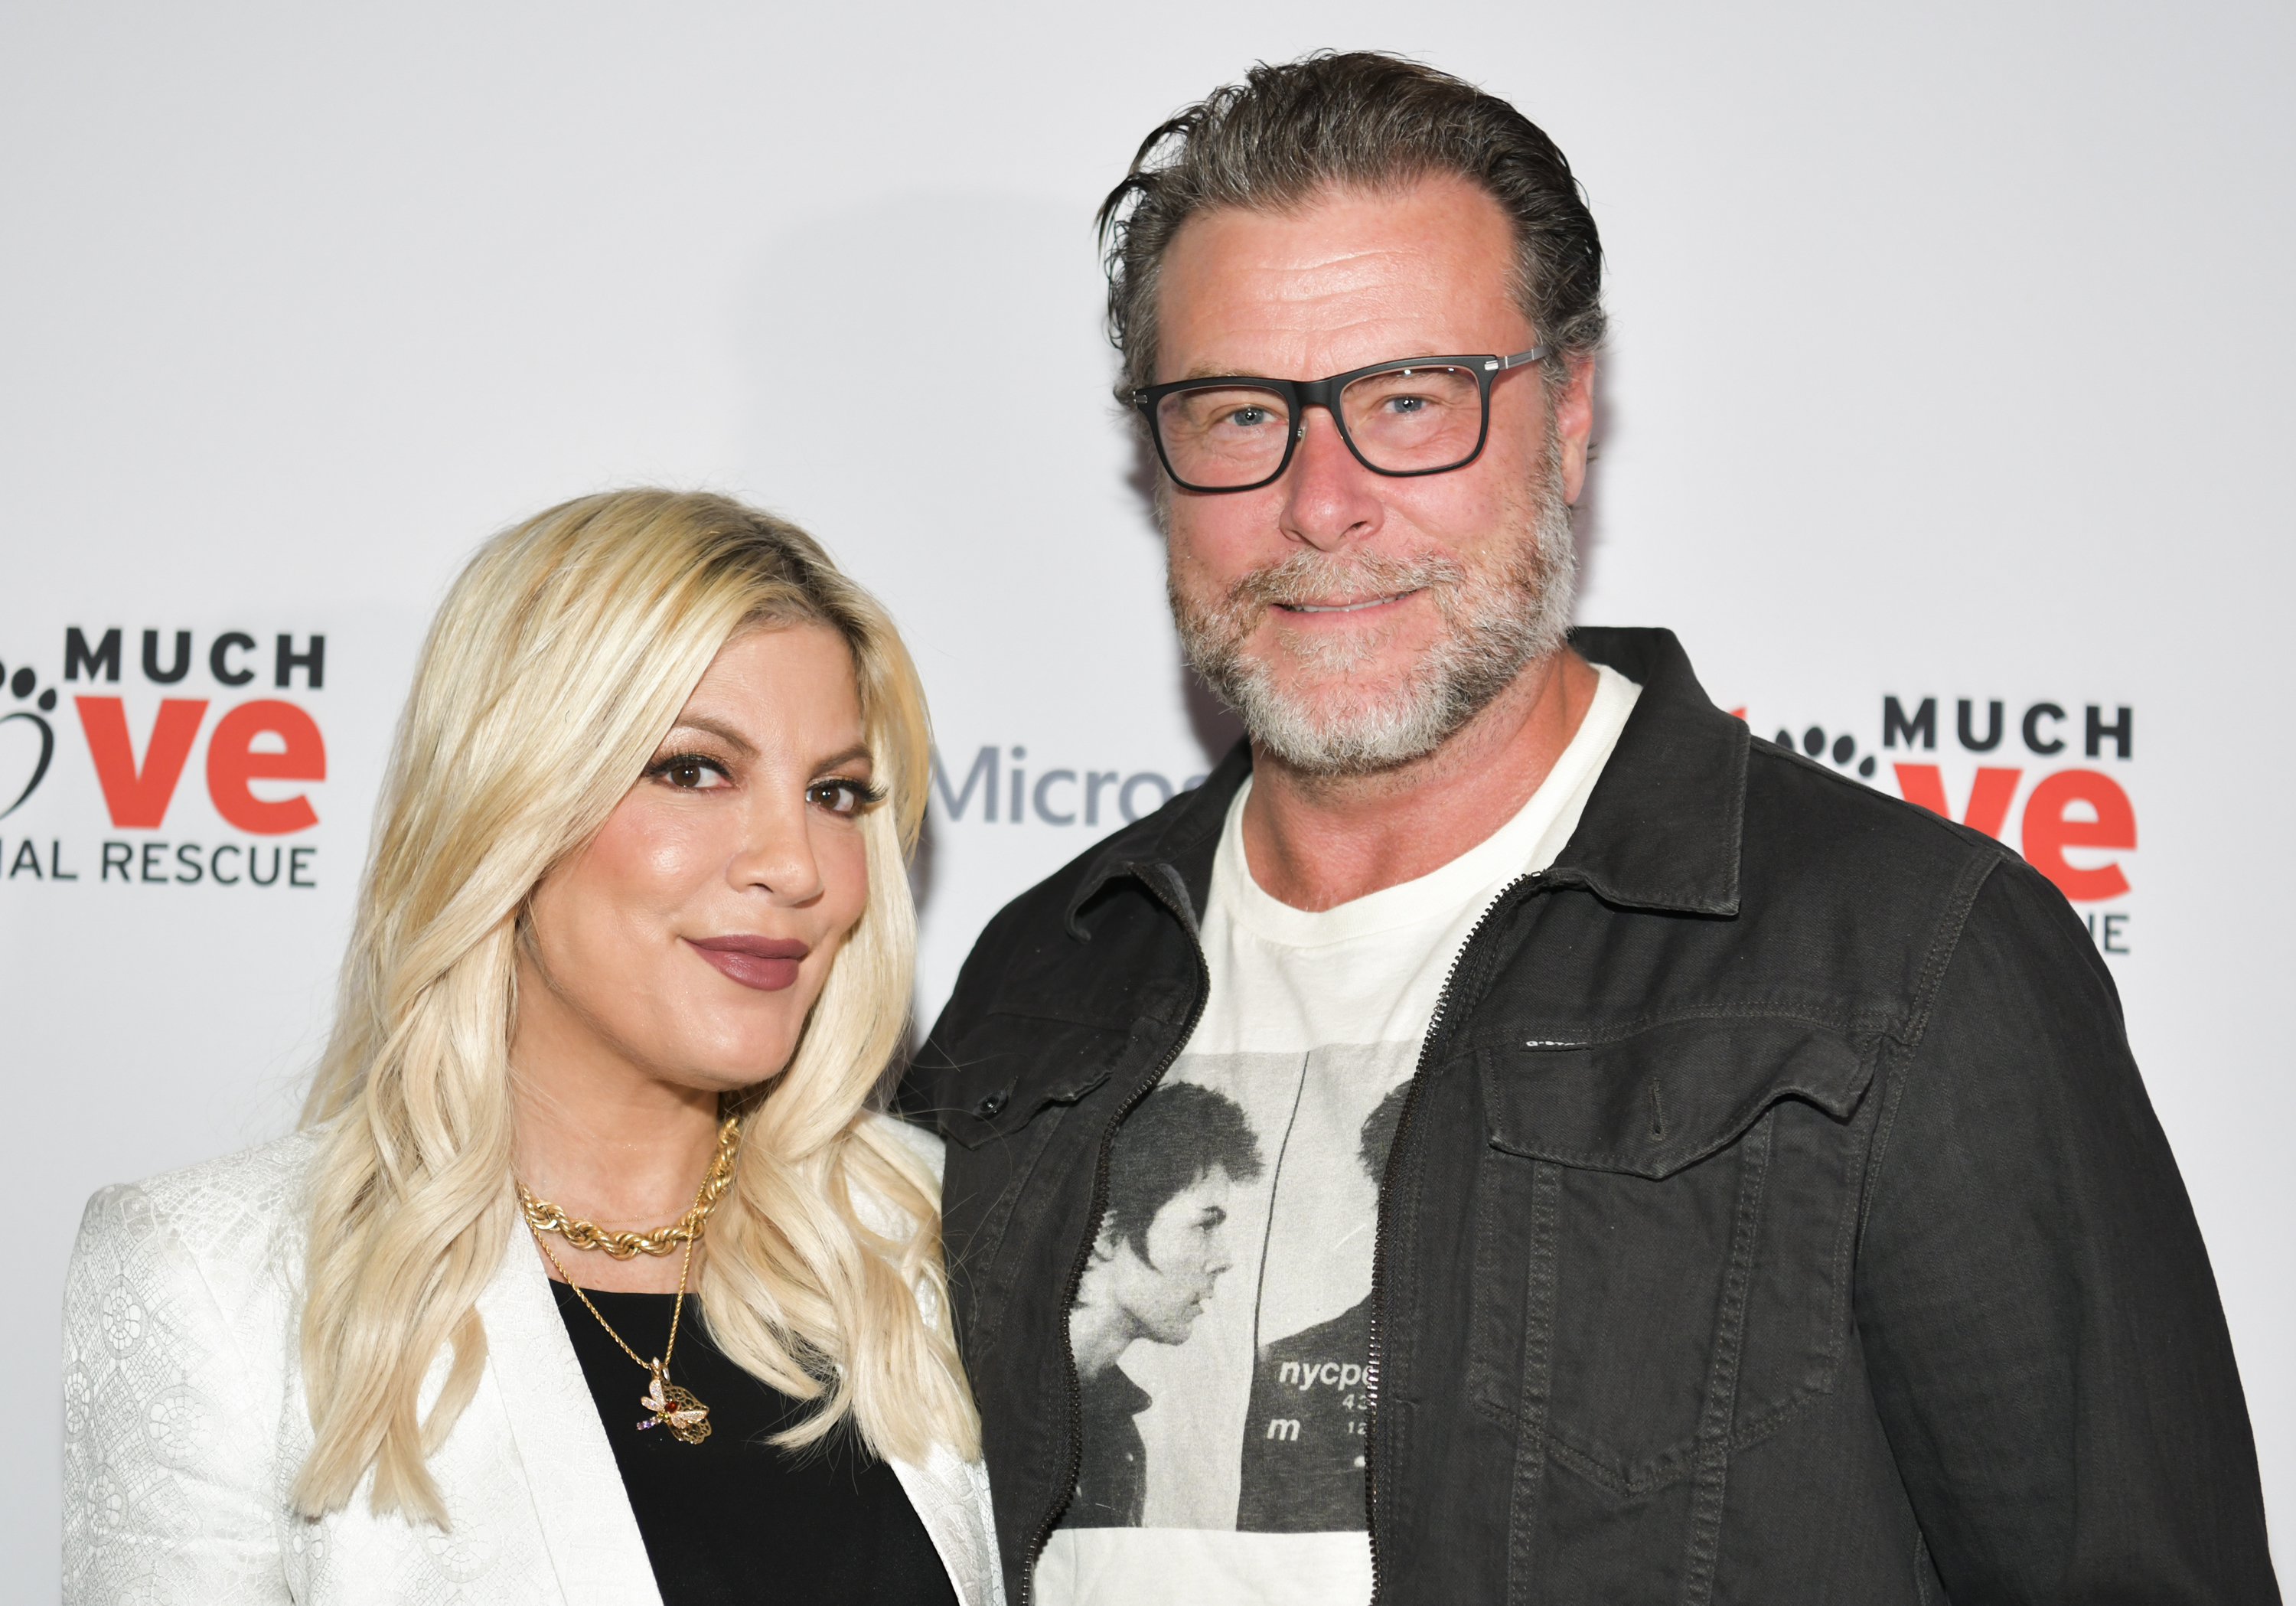 Tori Spelling and Dean McDermott attend the Much Love Animal Rescue 3rd Annual Spoken Woof Benefit at Microsoft Lounge on October 17, 2019, in Culver City, California. | Source: Getty Images